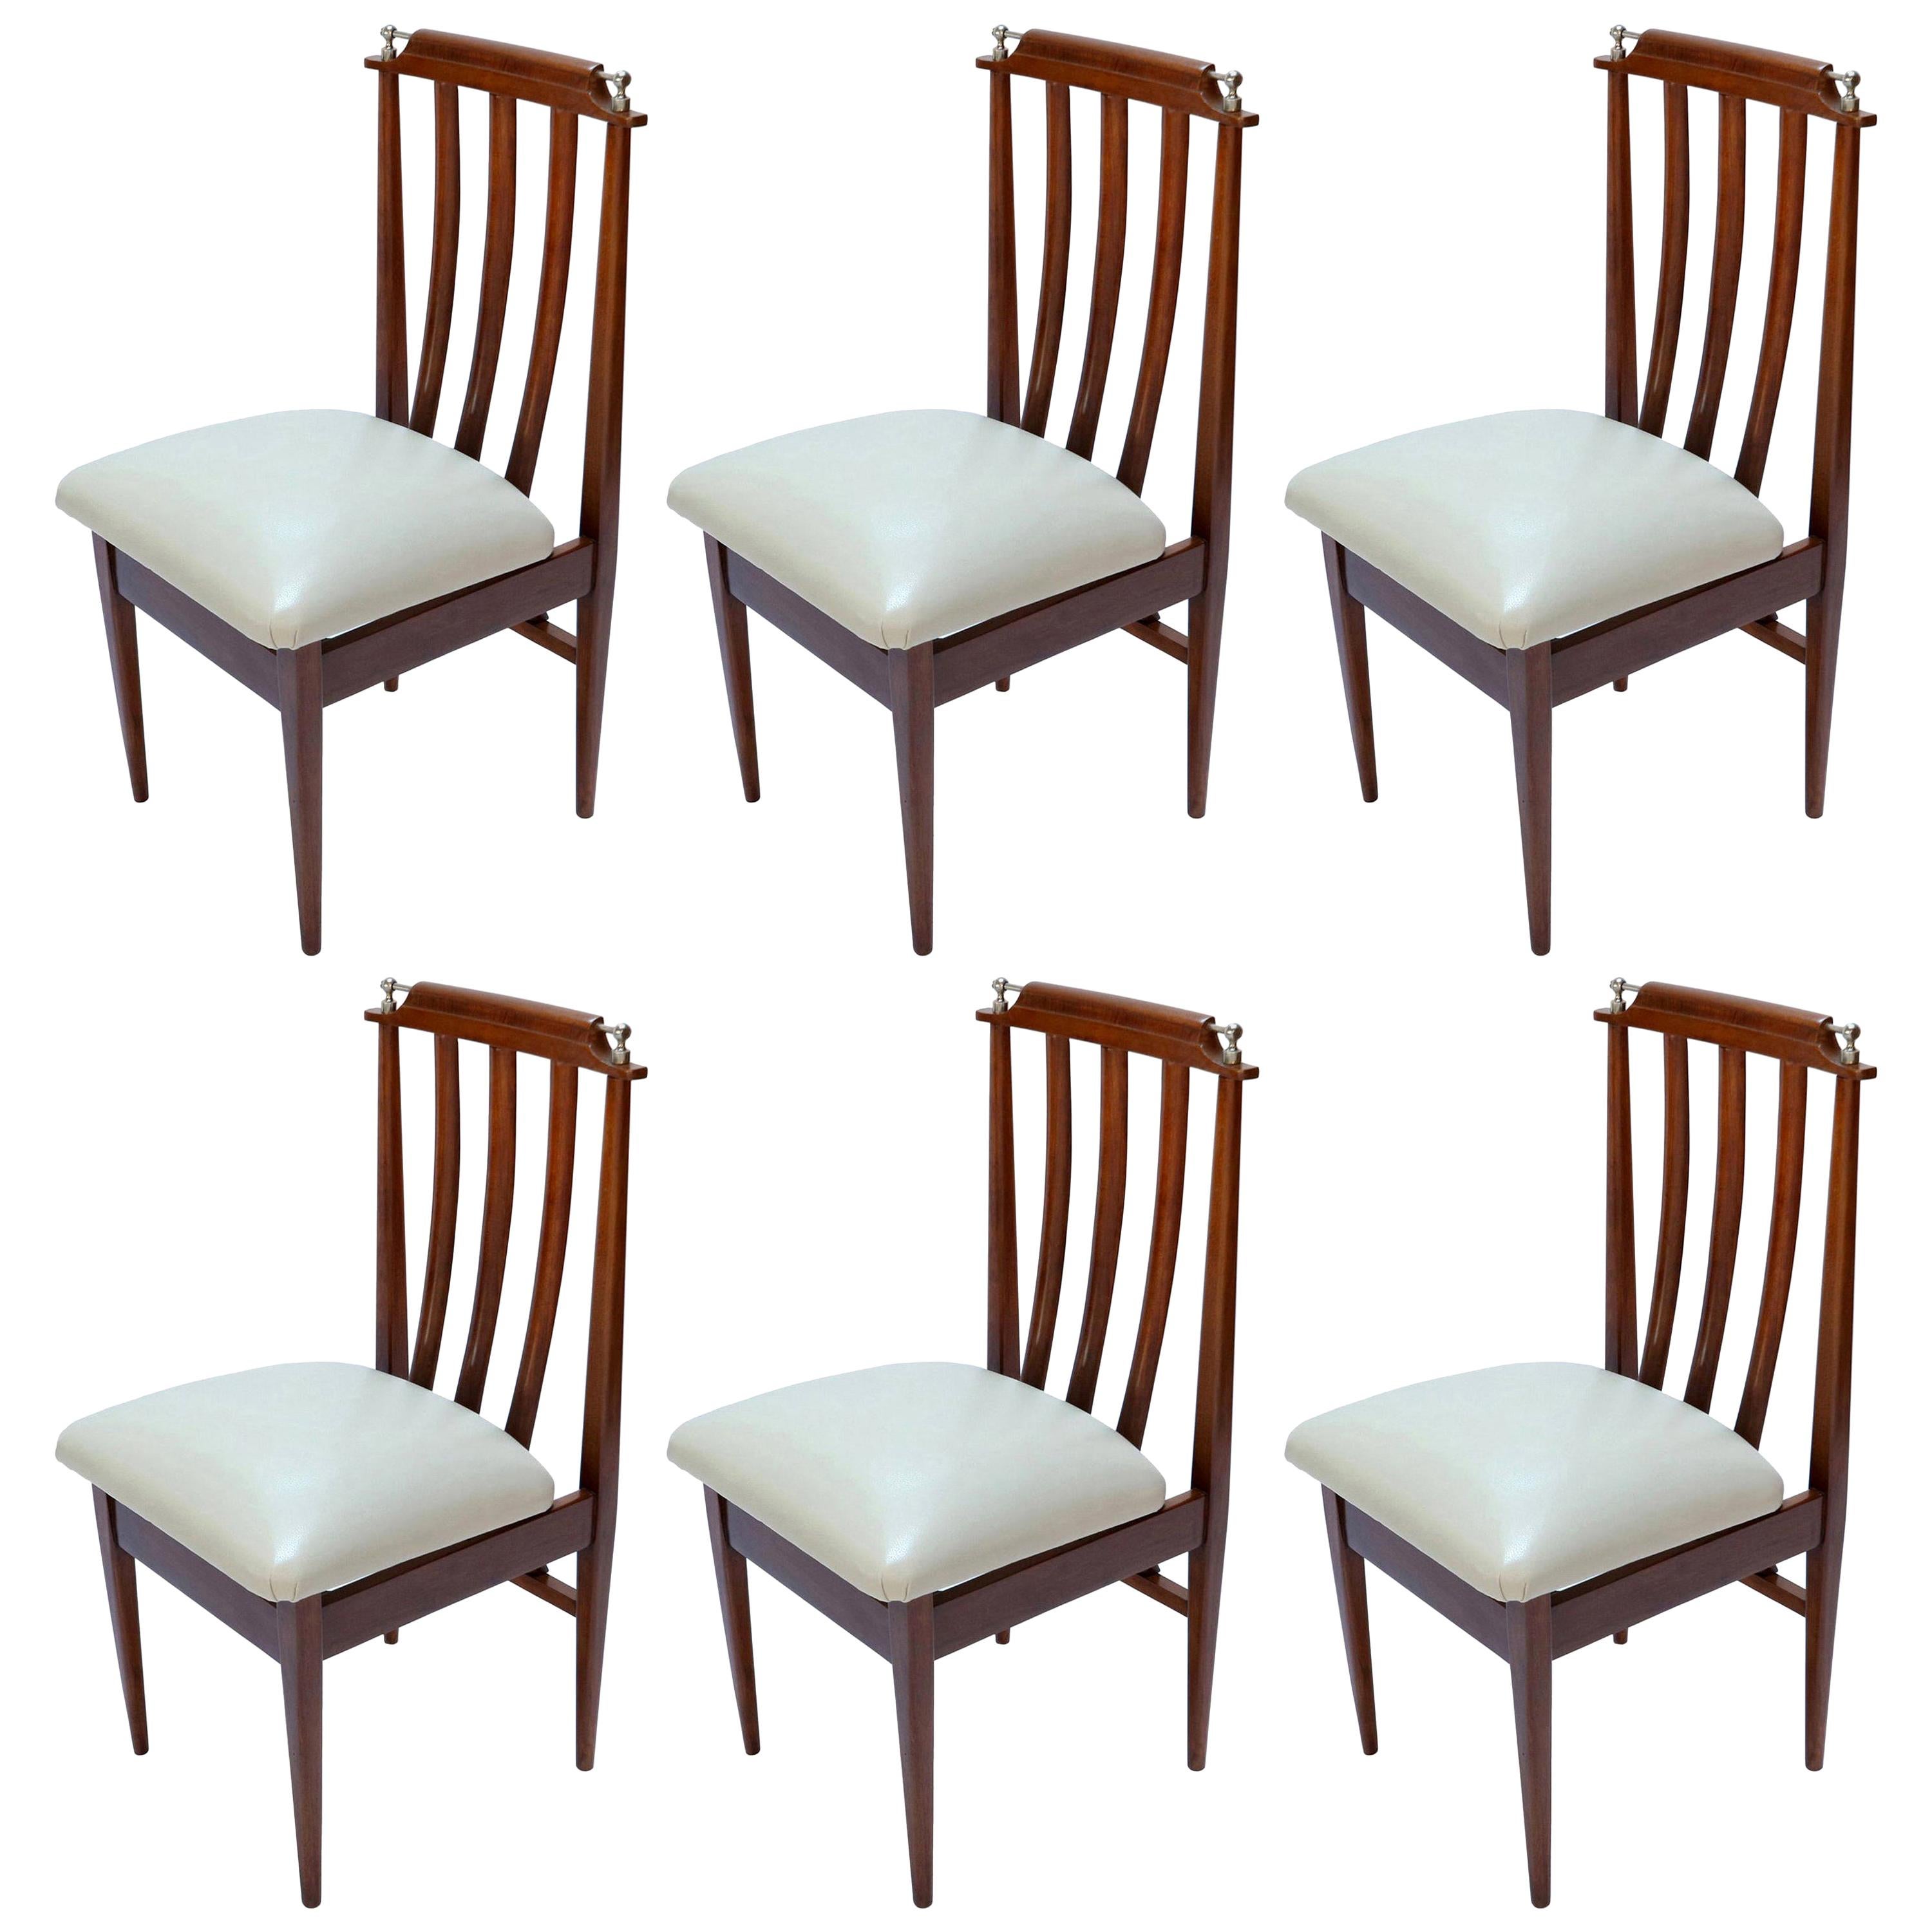 Set of Six 1960s Argentinian Wooden Dining Chairs with Beige and Chrome Details